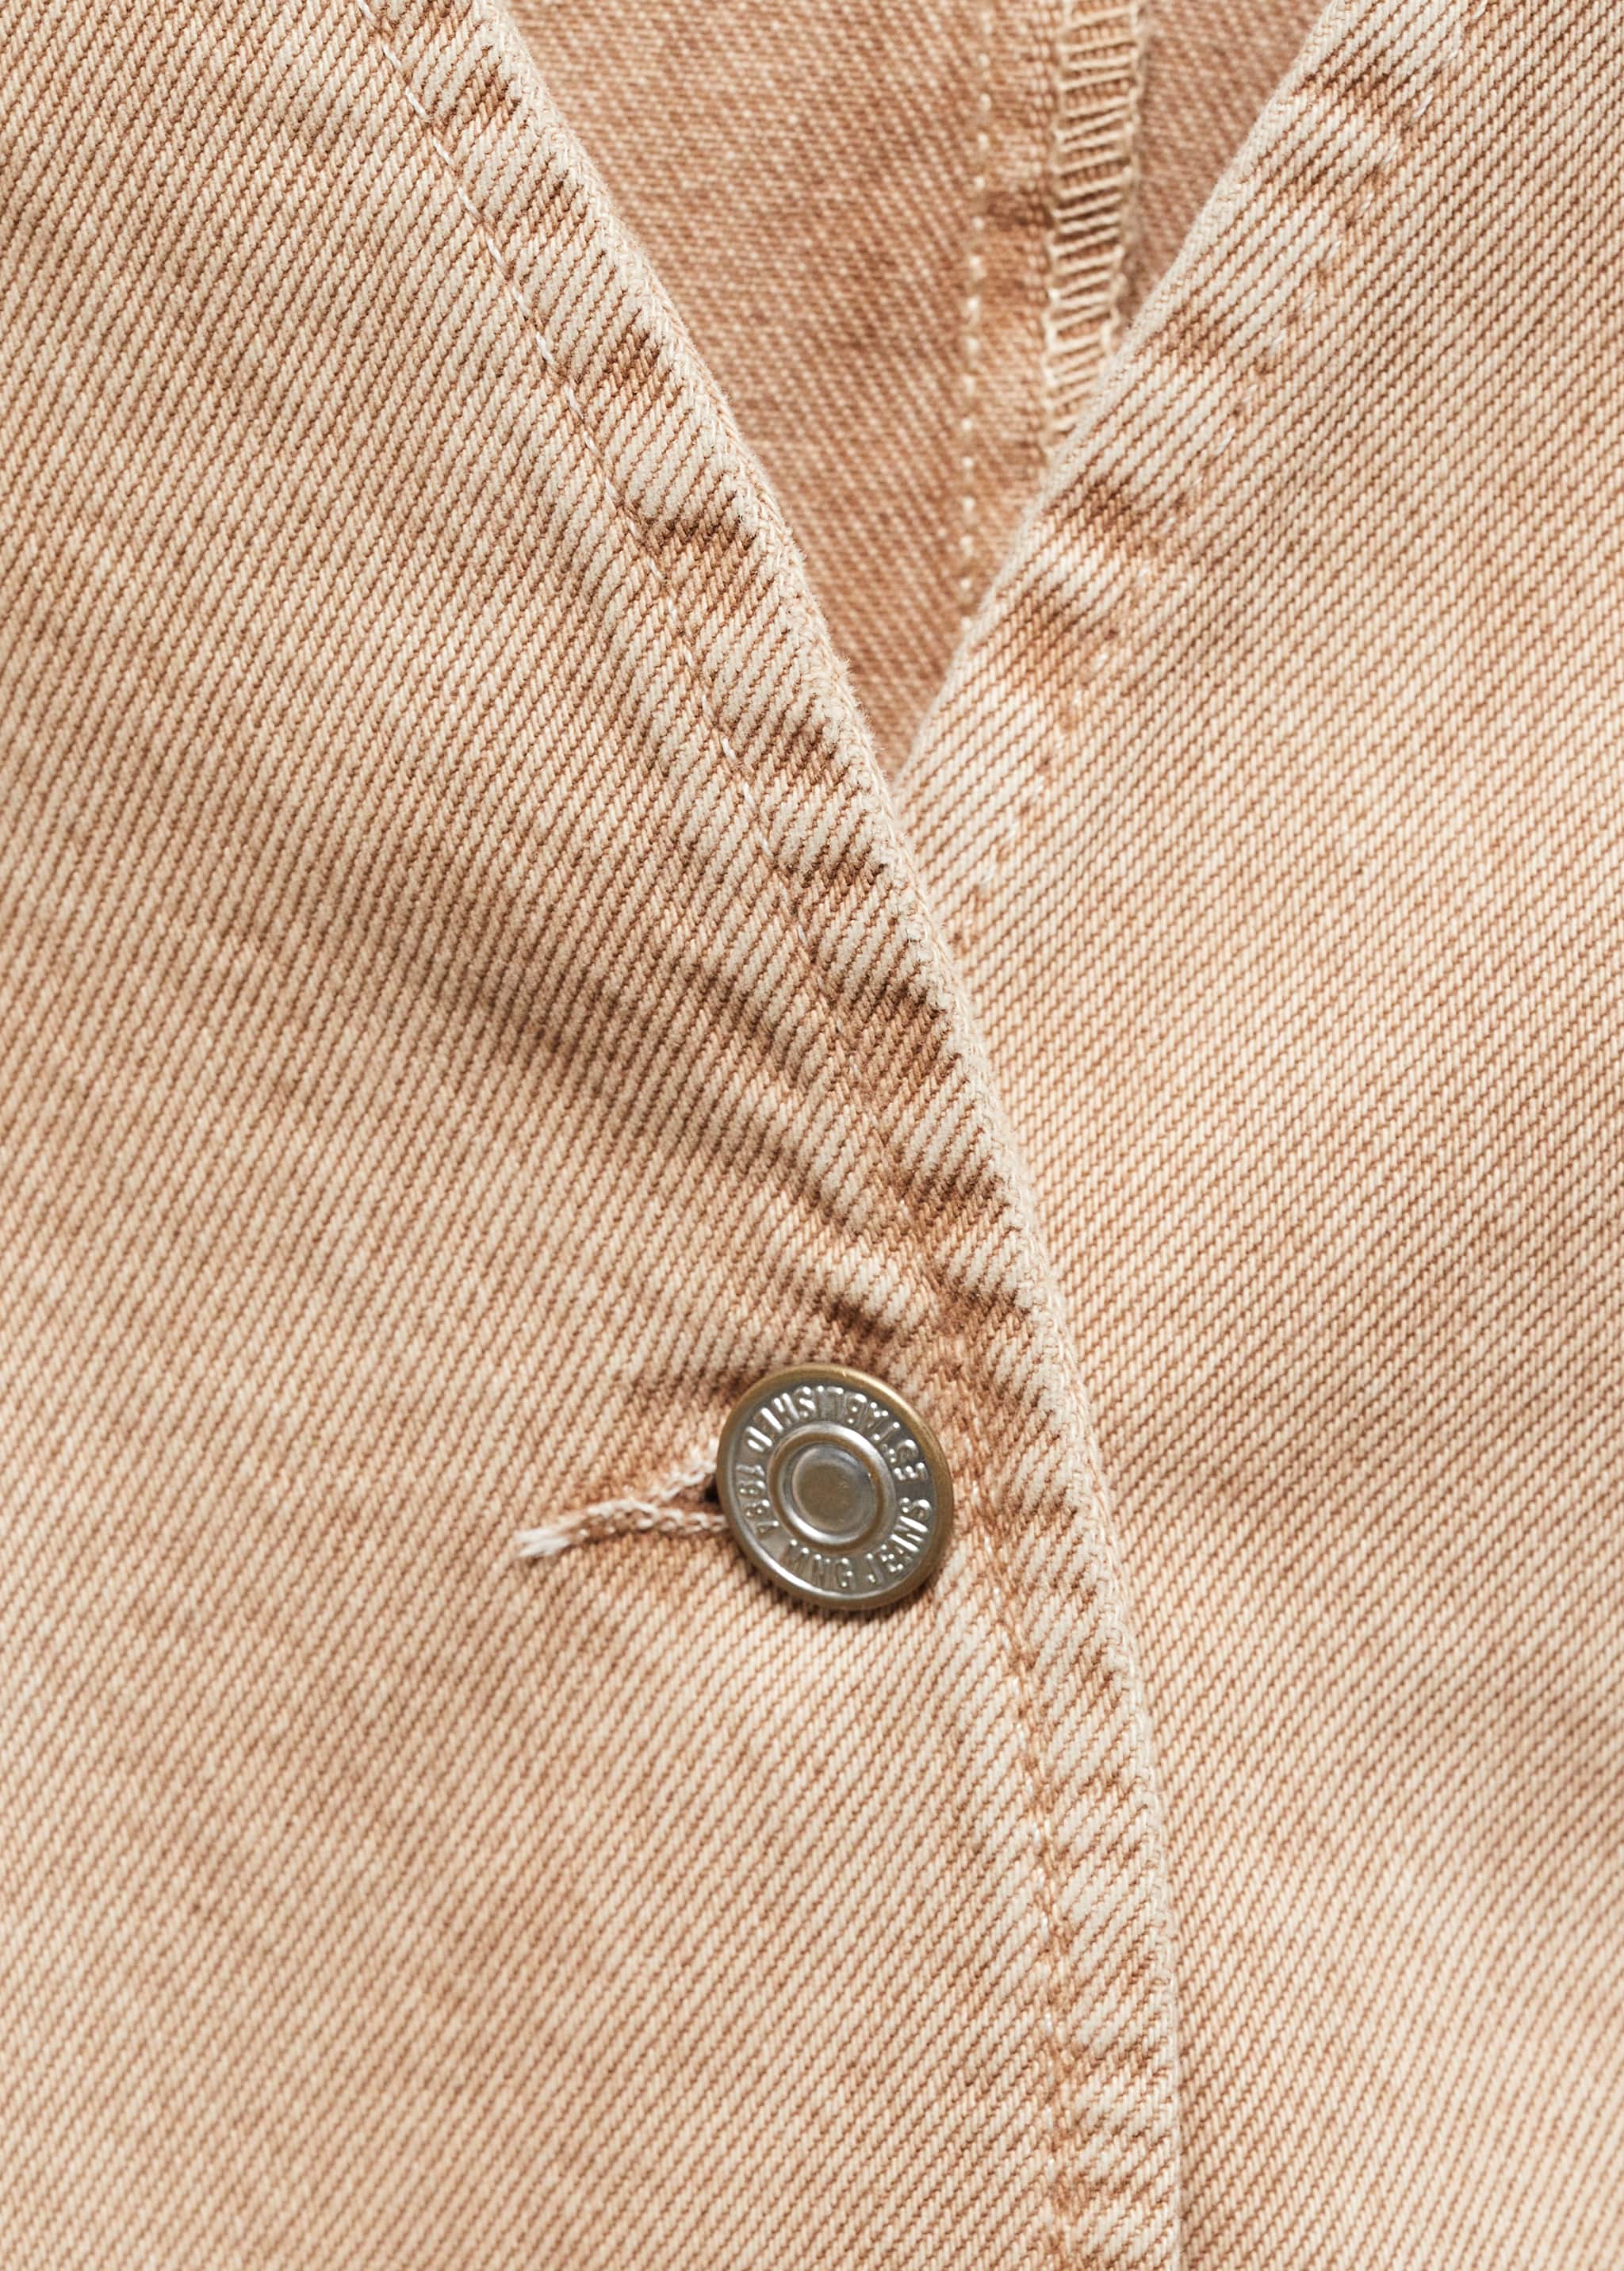 Denim gilet with seams - Details of the article 8